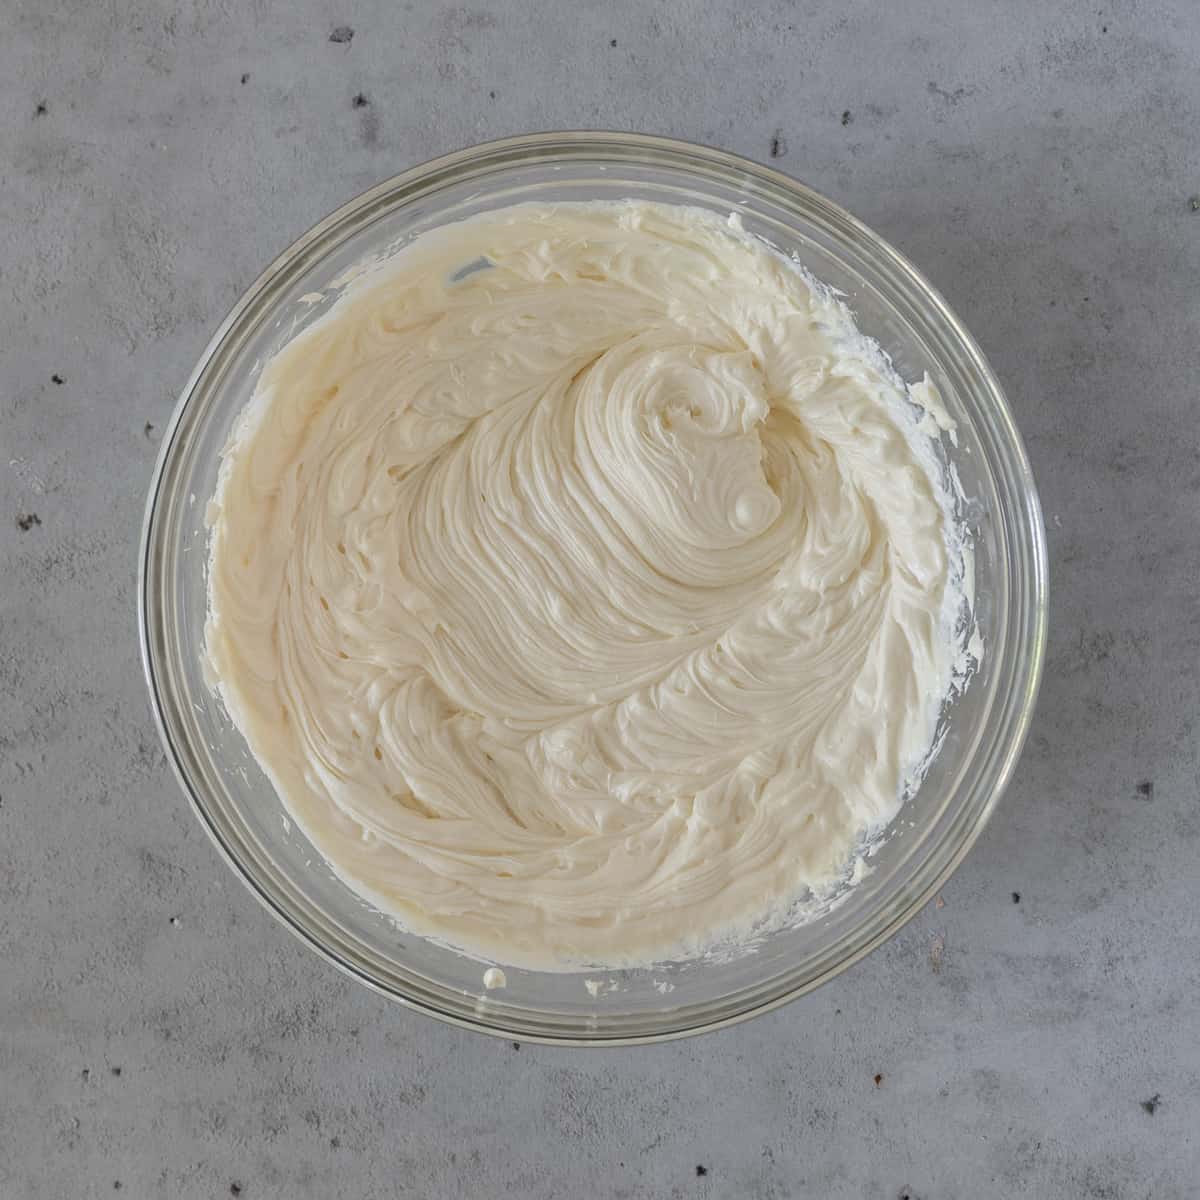 the cream cheese and sugar combined in a glass bowl on a grey background.